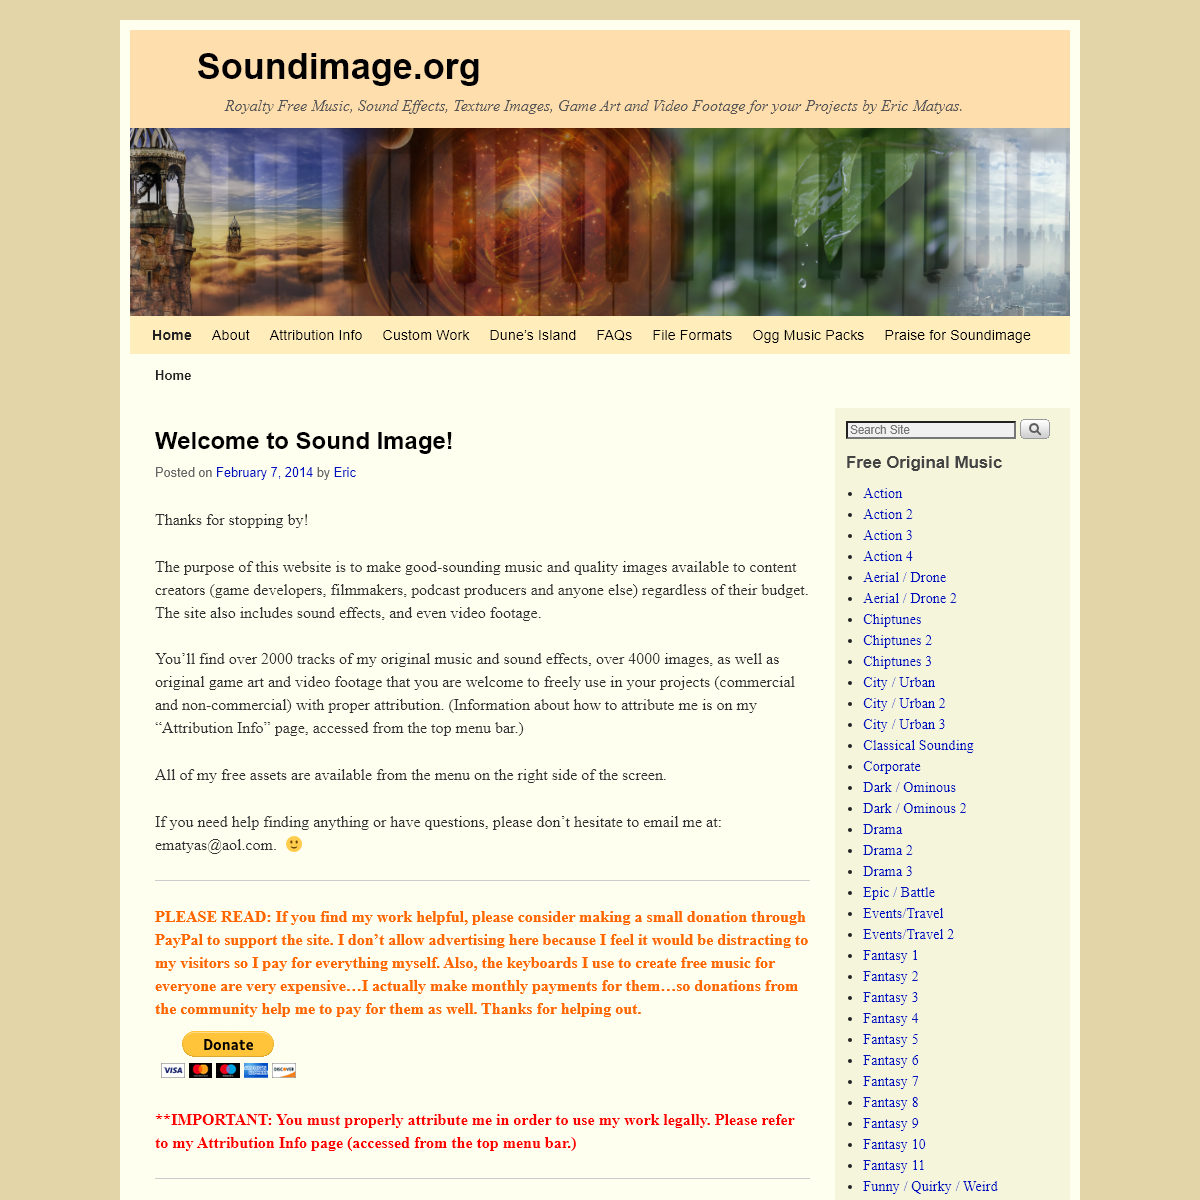 A complete backup of soundimage.org